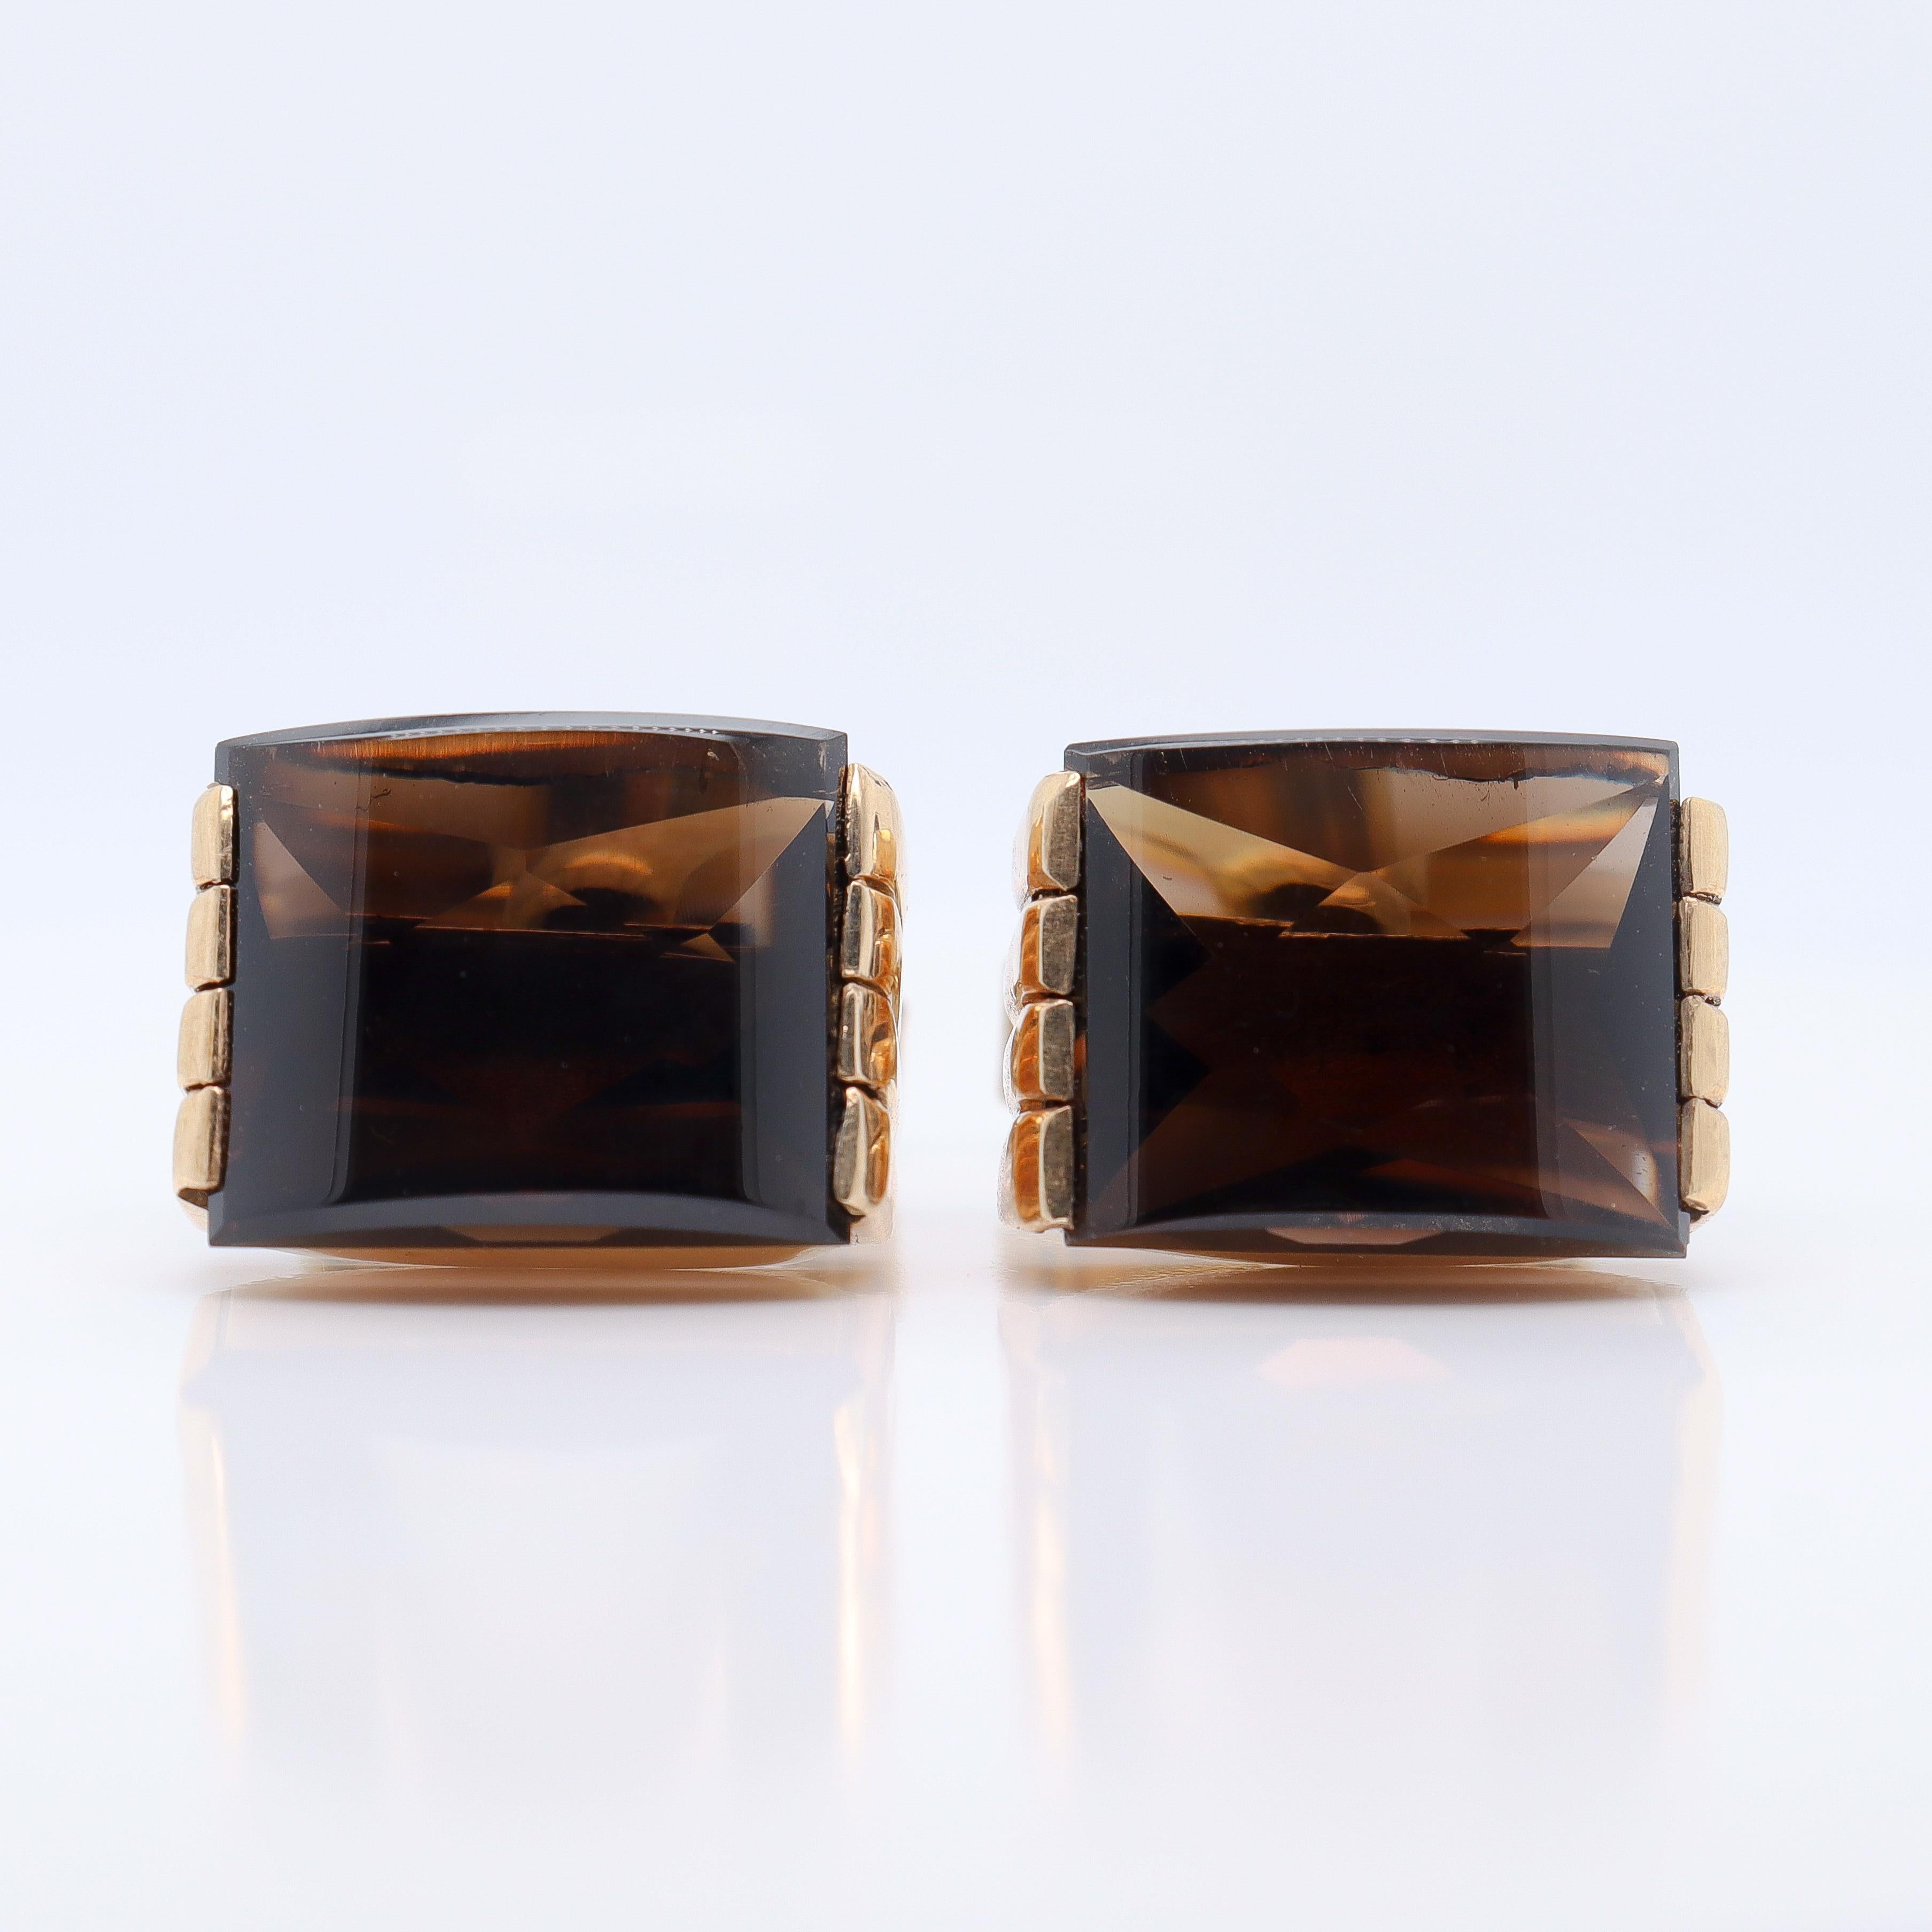 Signed Antique Austrian Art Deco Period 14k Gold and Smoky Quartz Cufflinks In Good Condition For Sale In Philadelphia, PA